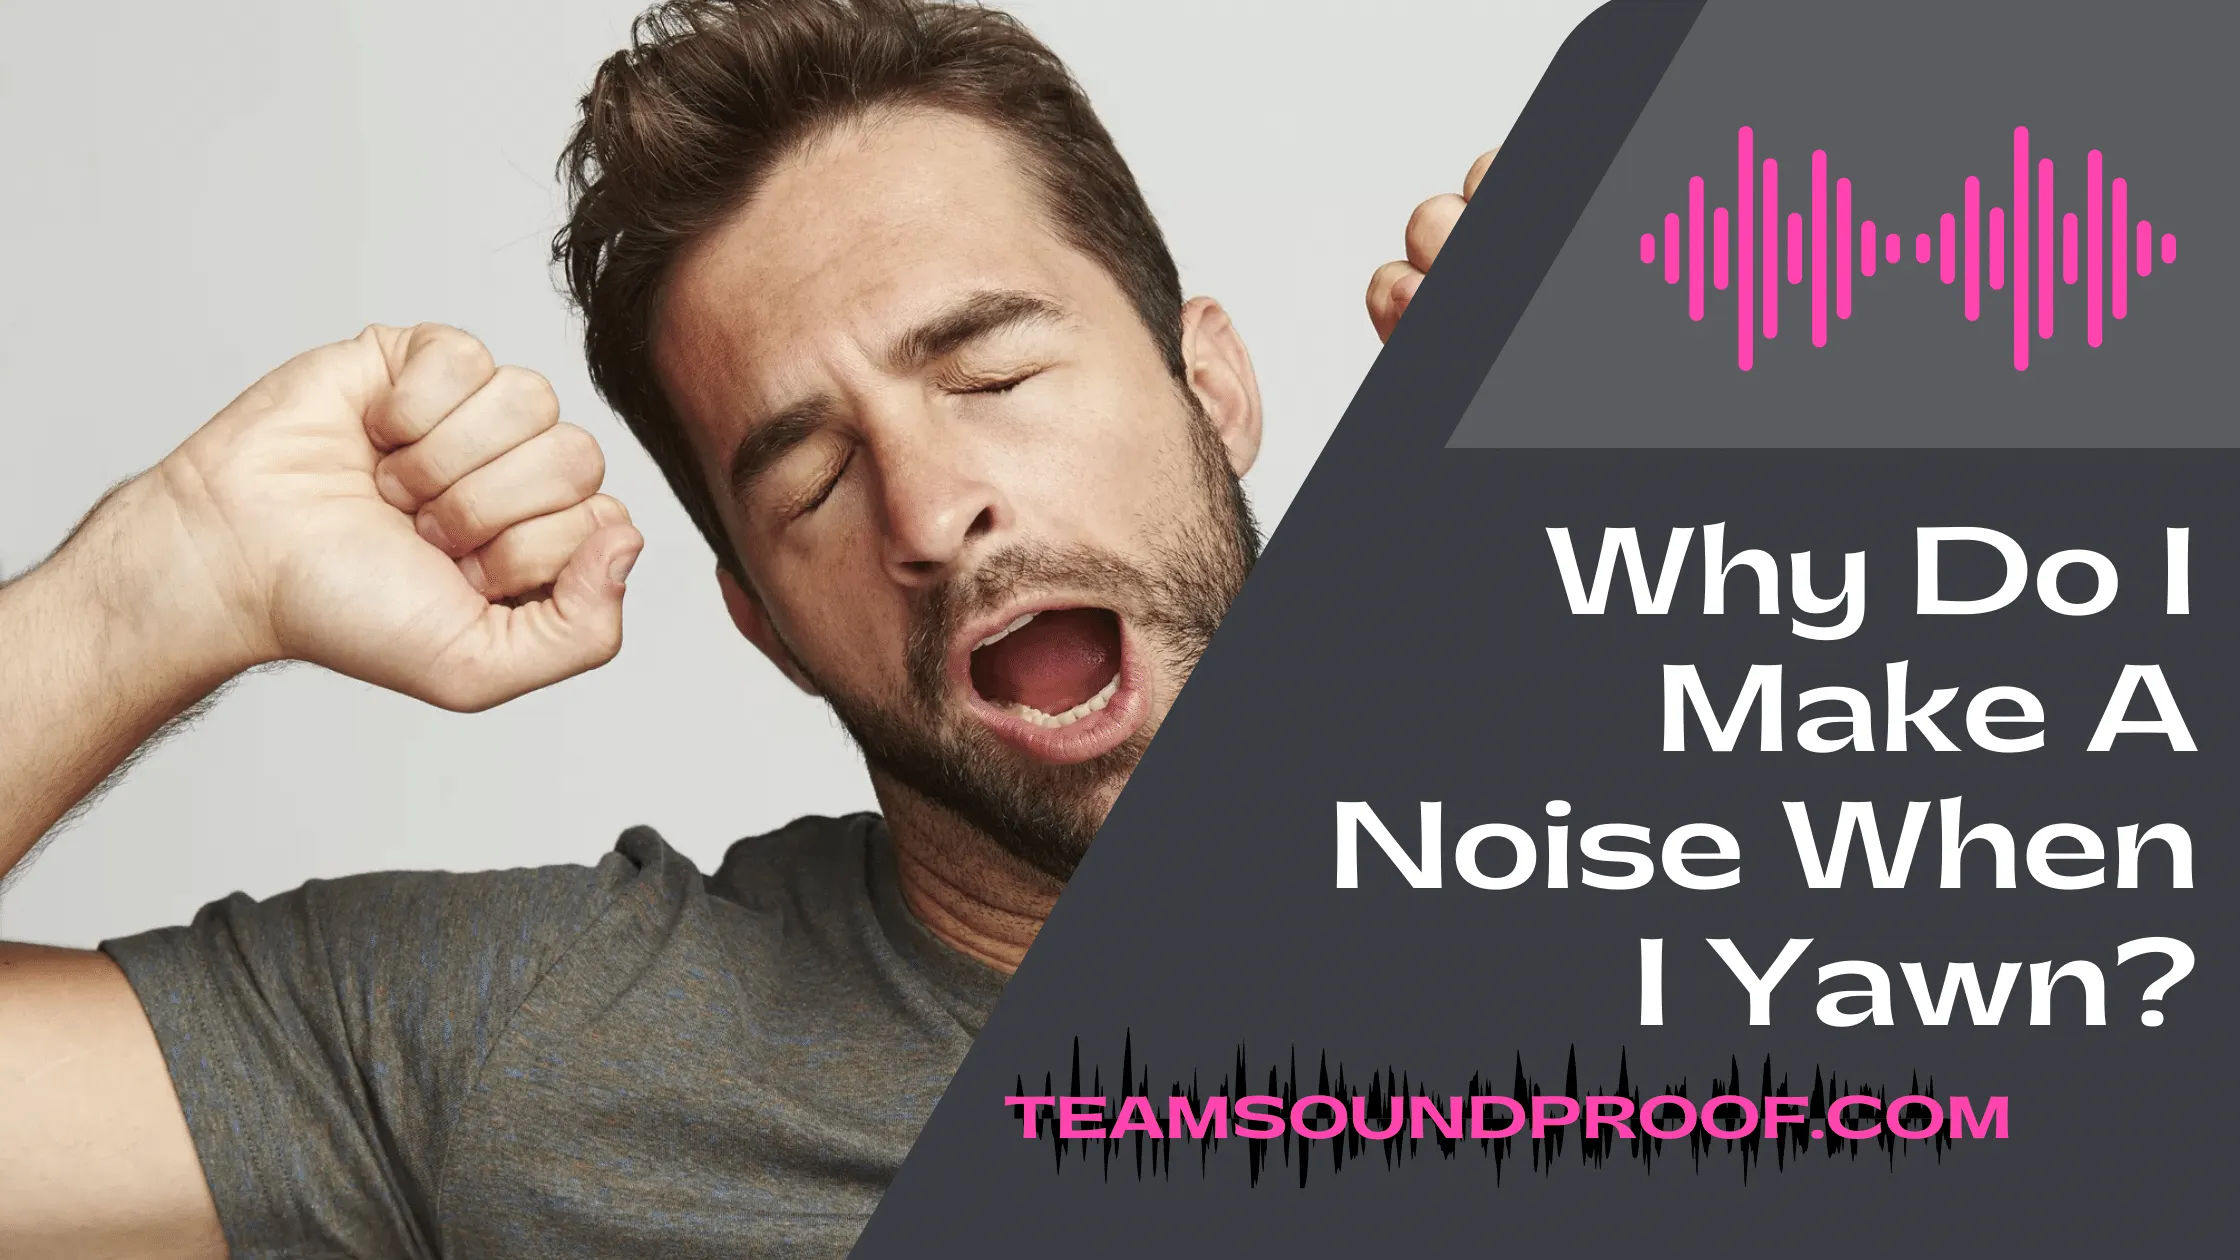 Why Do I Make A Noise When I Yawn? #1 Guide